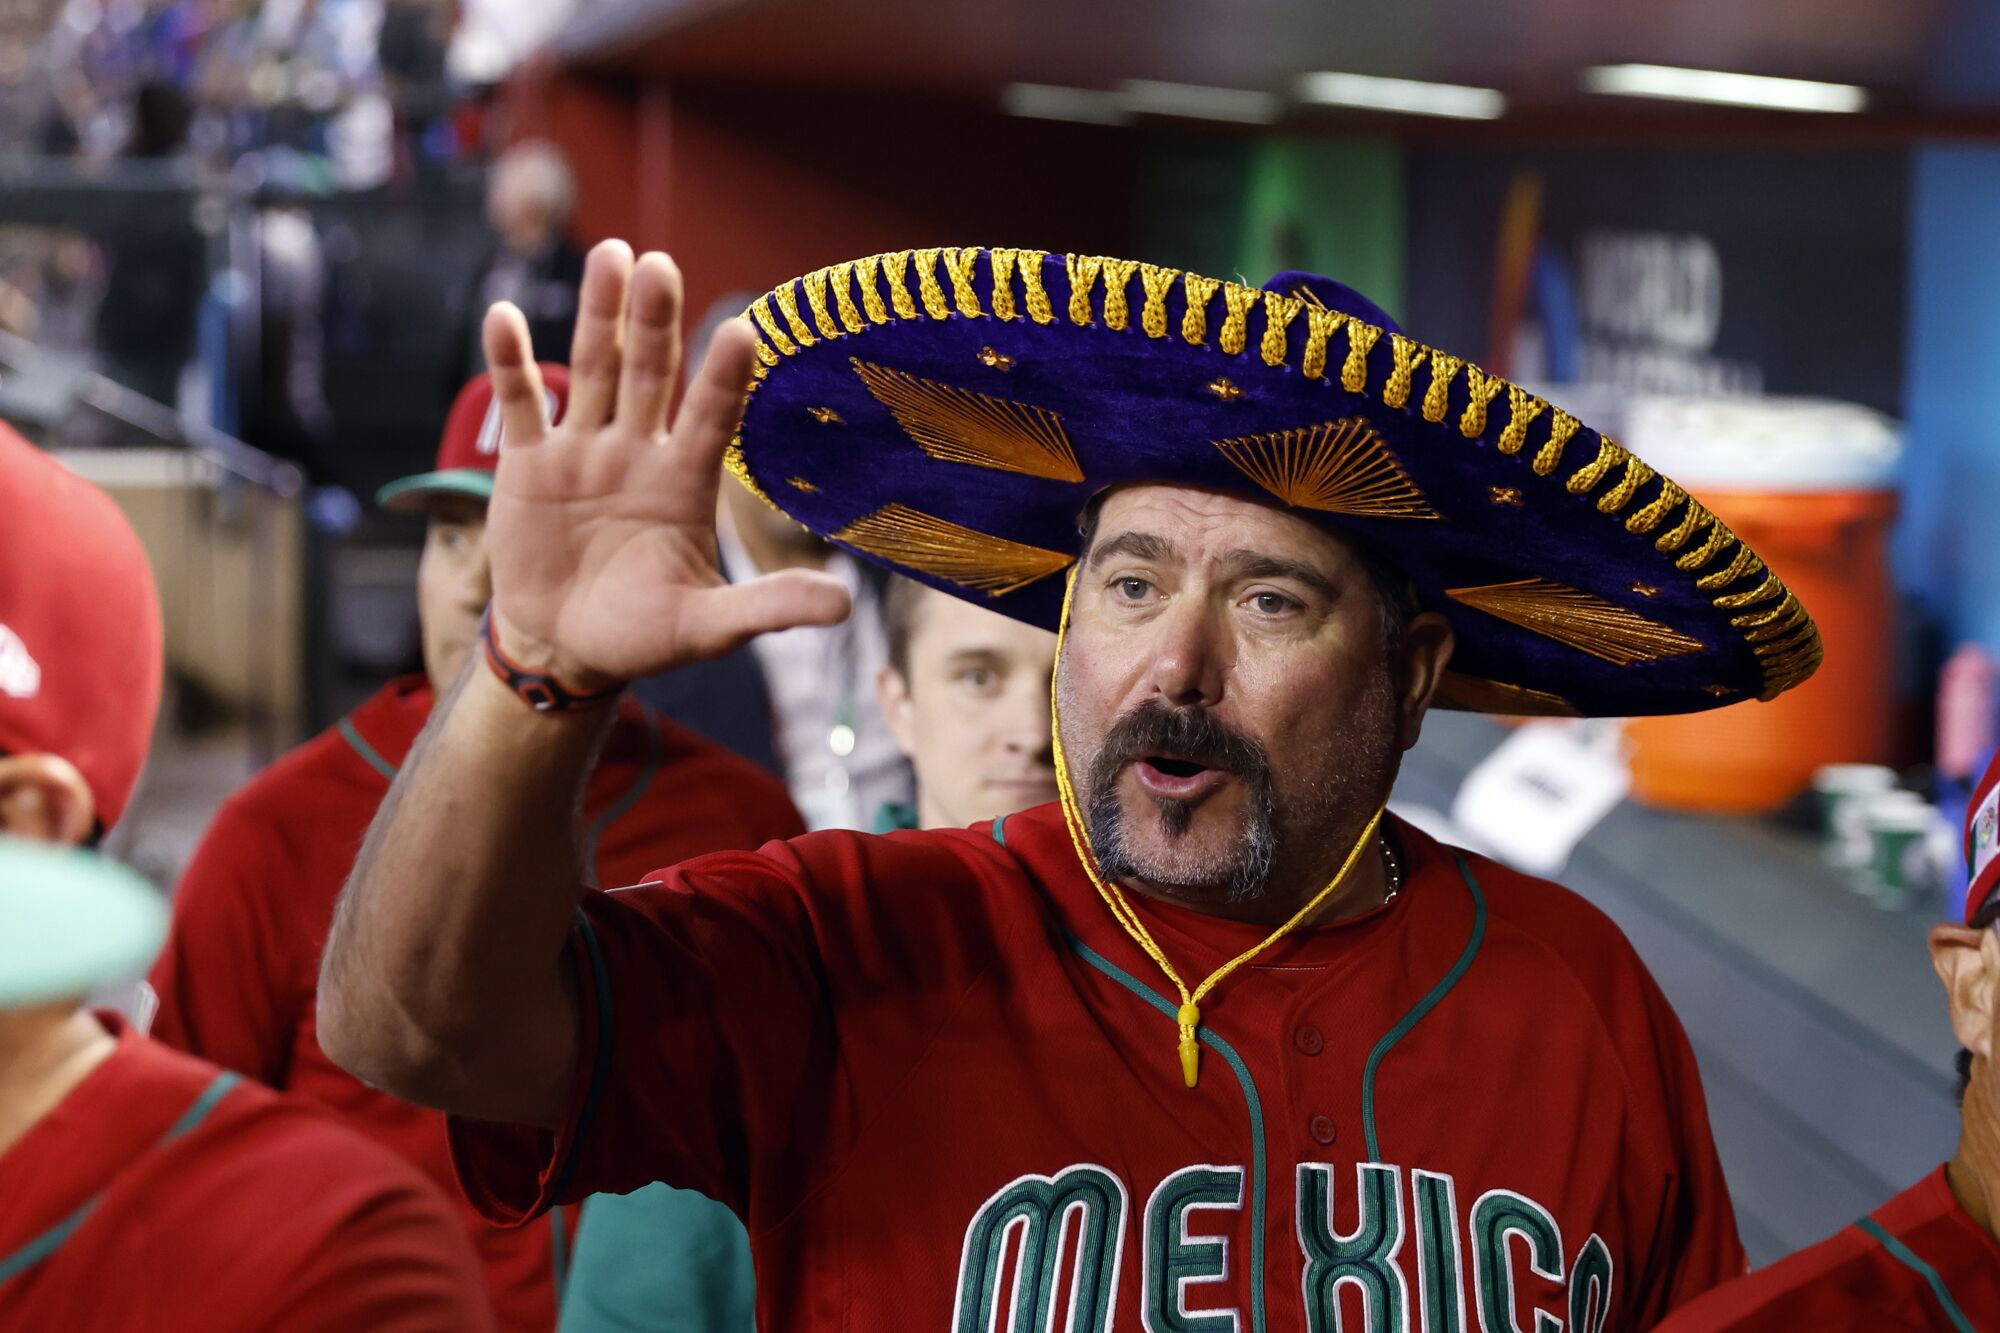 Mexico manager Benji Gil celebrates waves his hand while wearing a purple sombrero in the dugout.